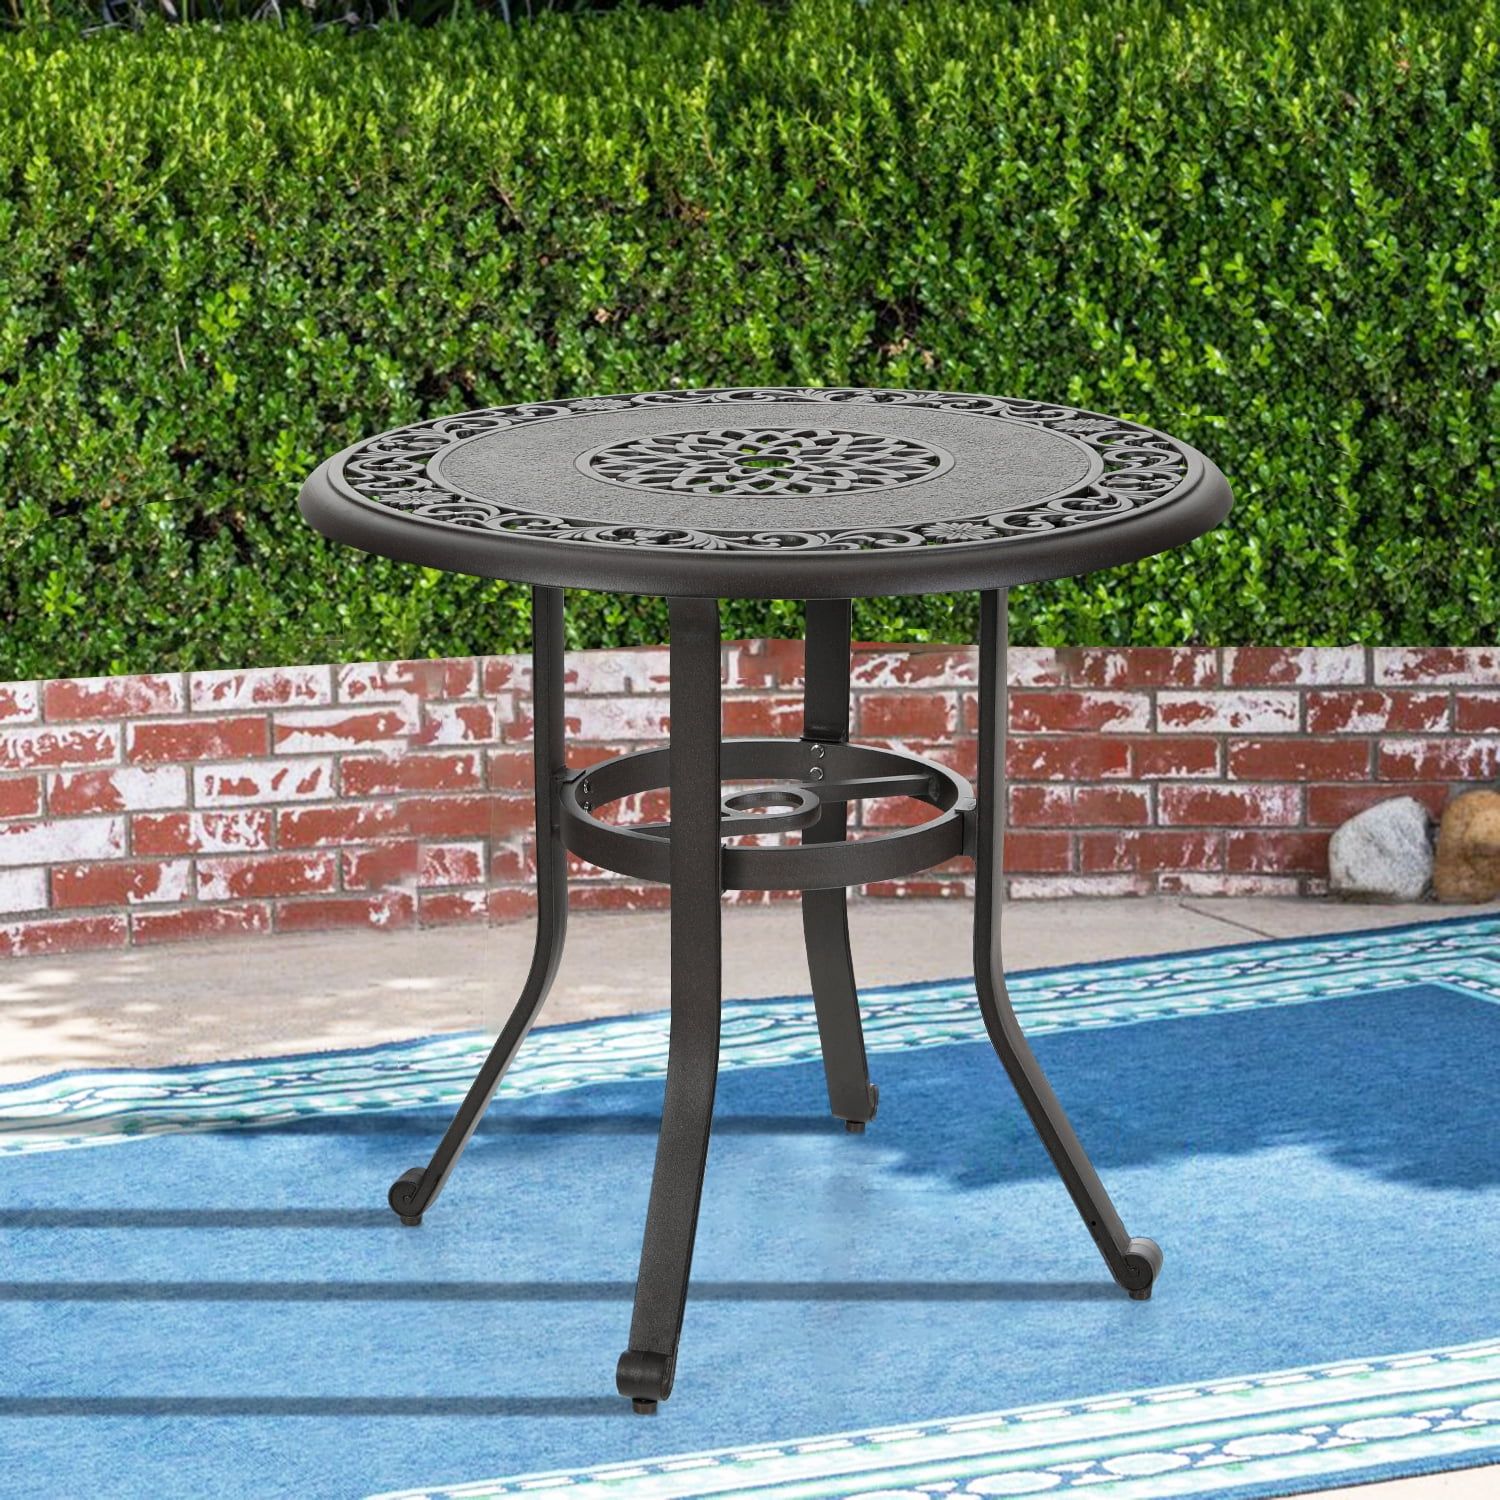 Mf Studio 32" Cast Aluminum Patio Outdoor Bistro Table, Round Dining Intended For Round Steel Patio Coffee Tables (View 11 of 15)